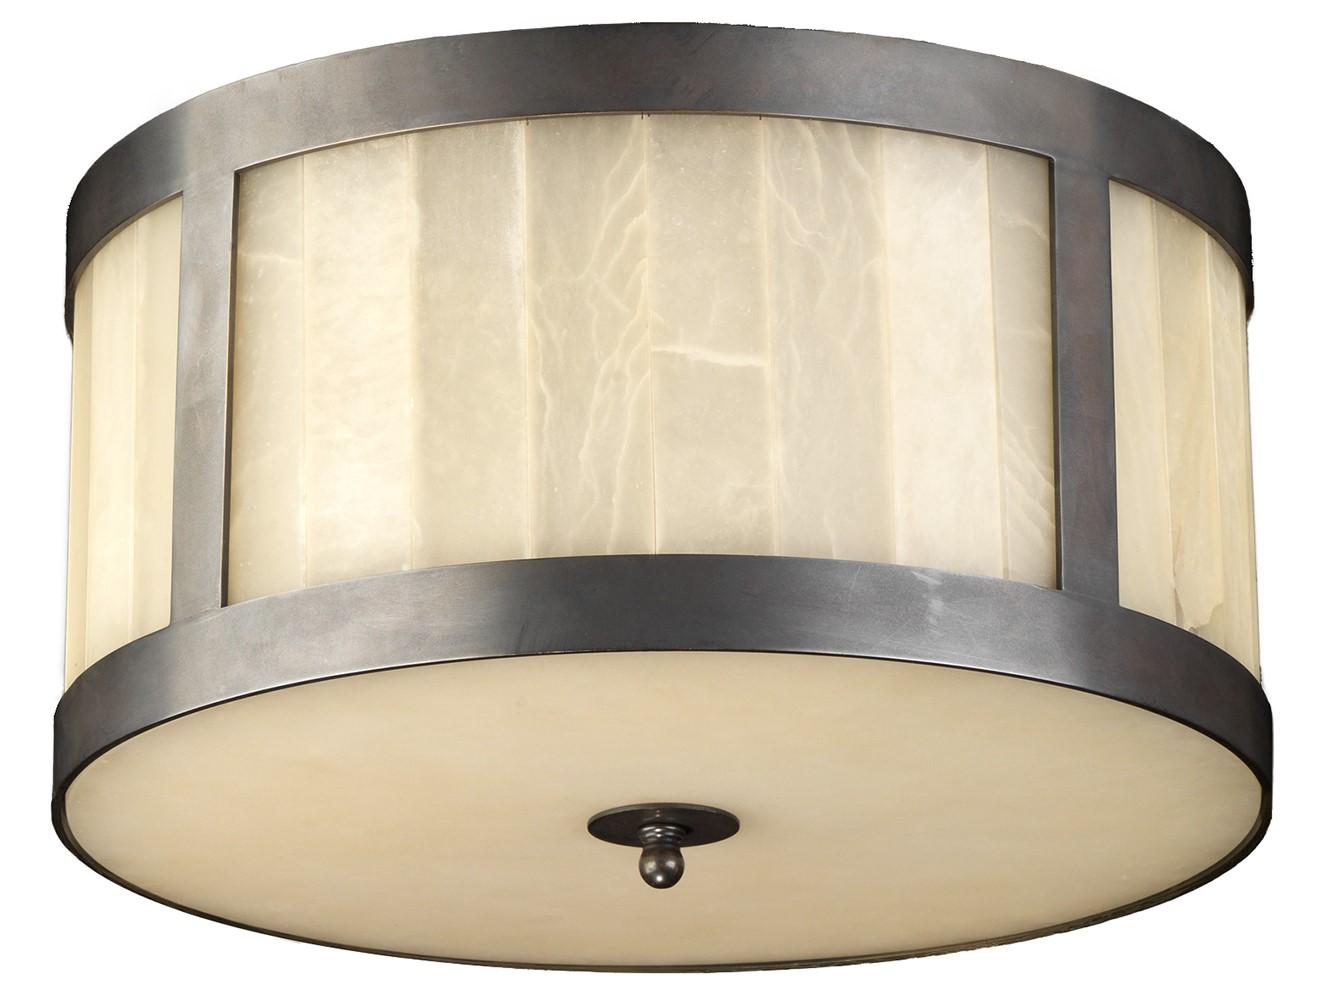 Understated elegance and modern design merge in this unique ceiling lamp. A Classic drum shape crafted in alabaster and framed with vertical and horizontal silver metal bands softly diffuses light, imbuing any room with an alluring glow. The